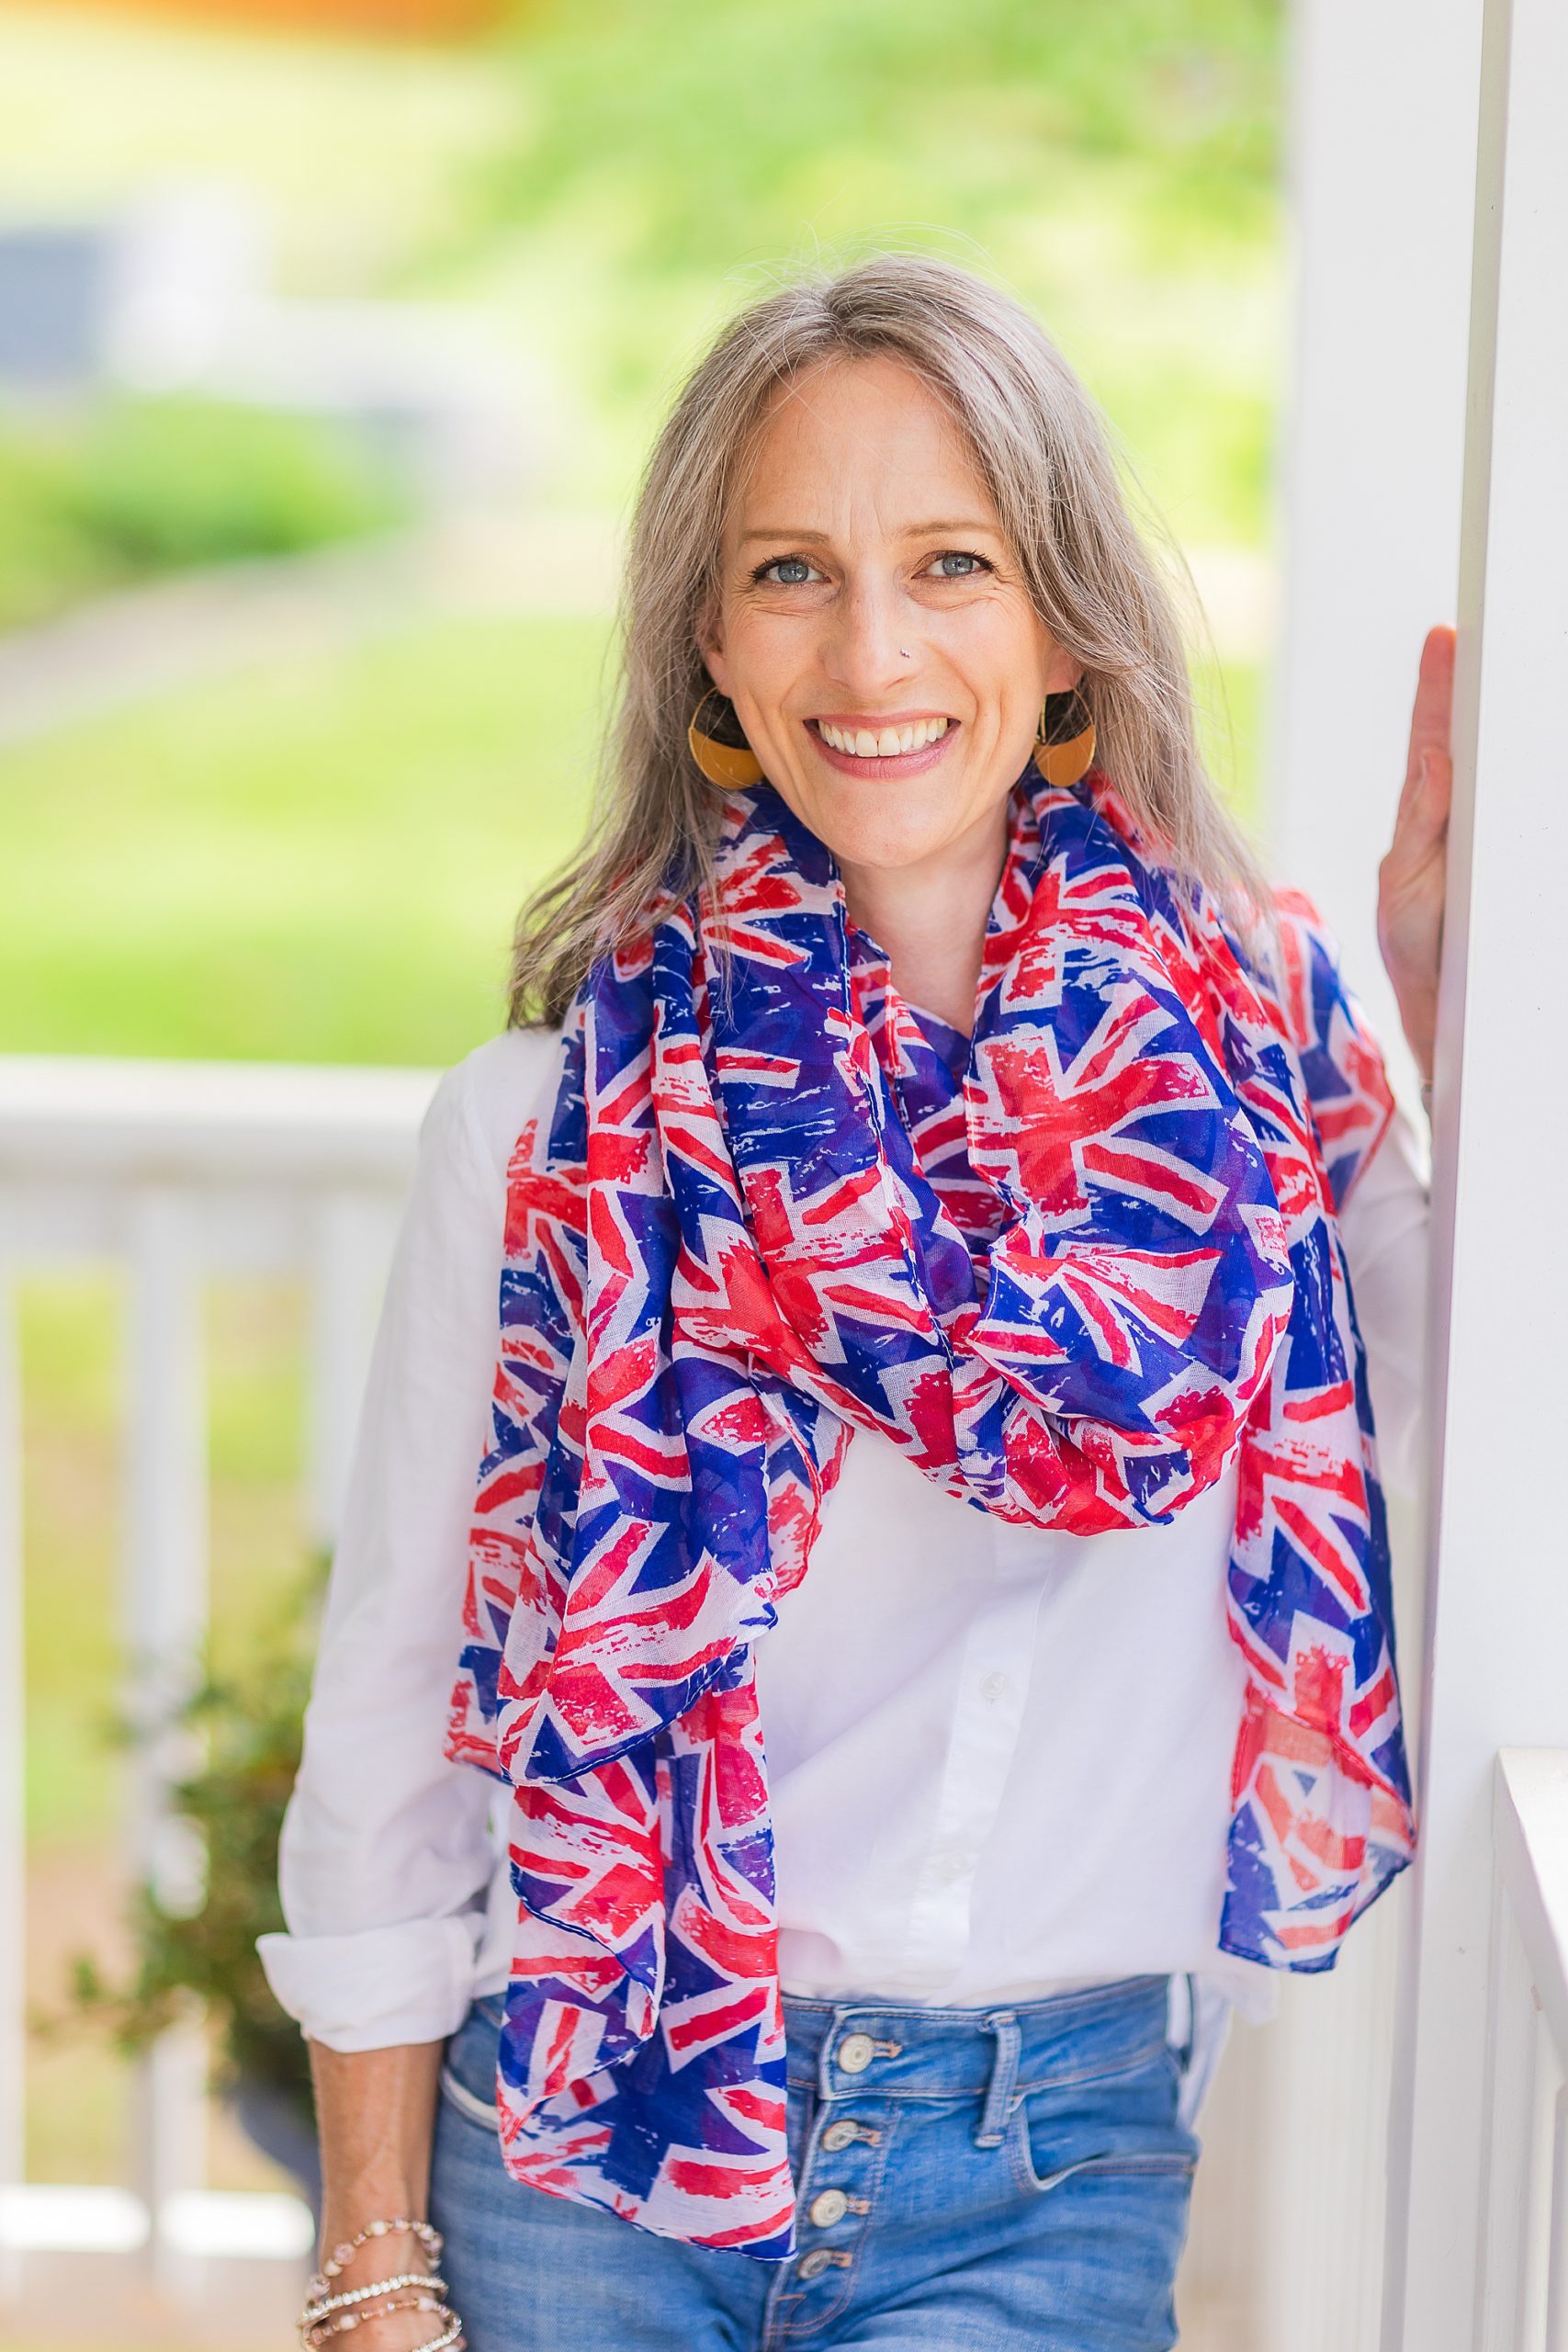 woman leans against railing of front porch in jeans and white shirt with UK flag scarf 